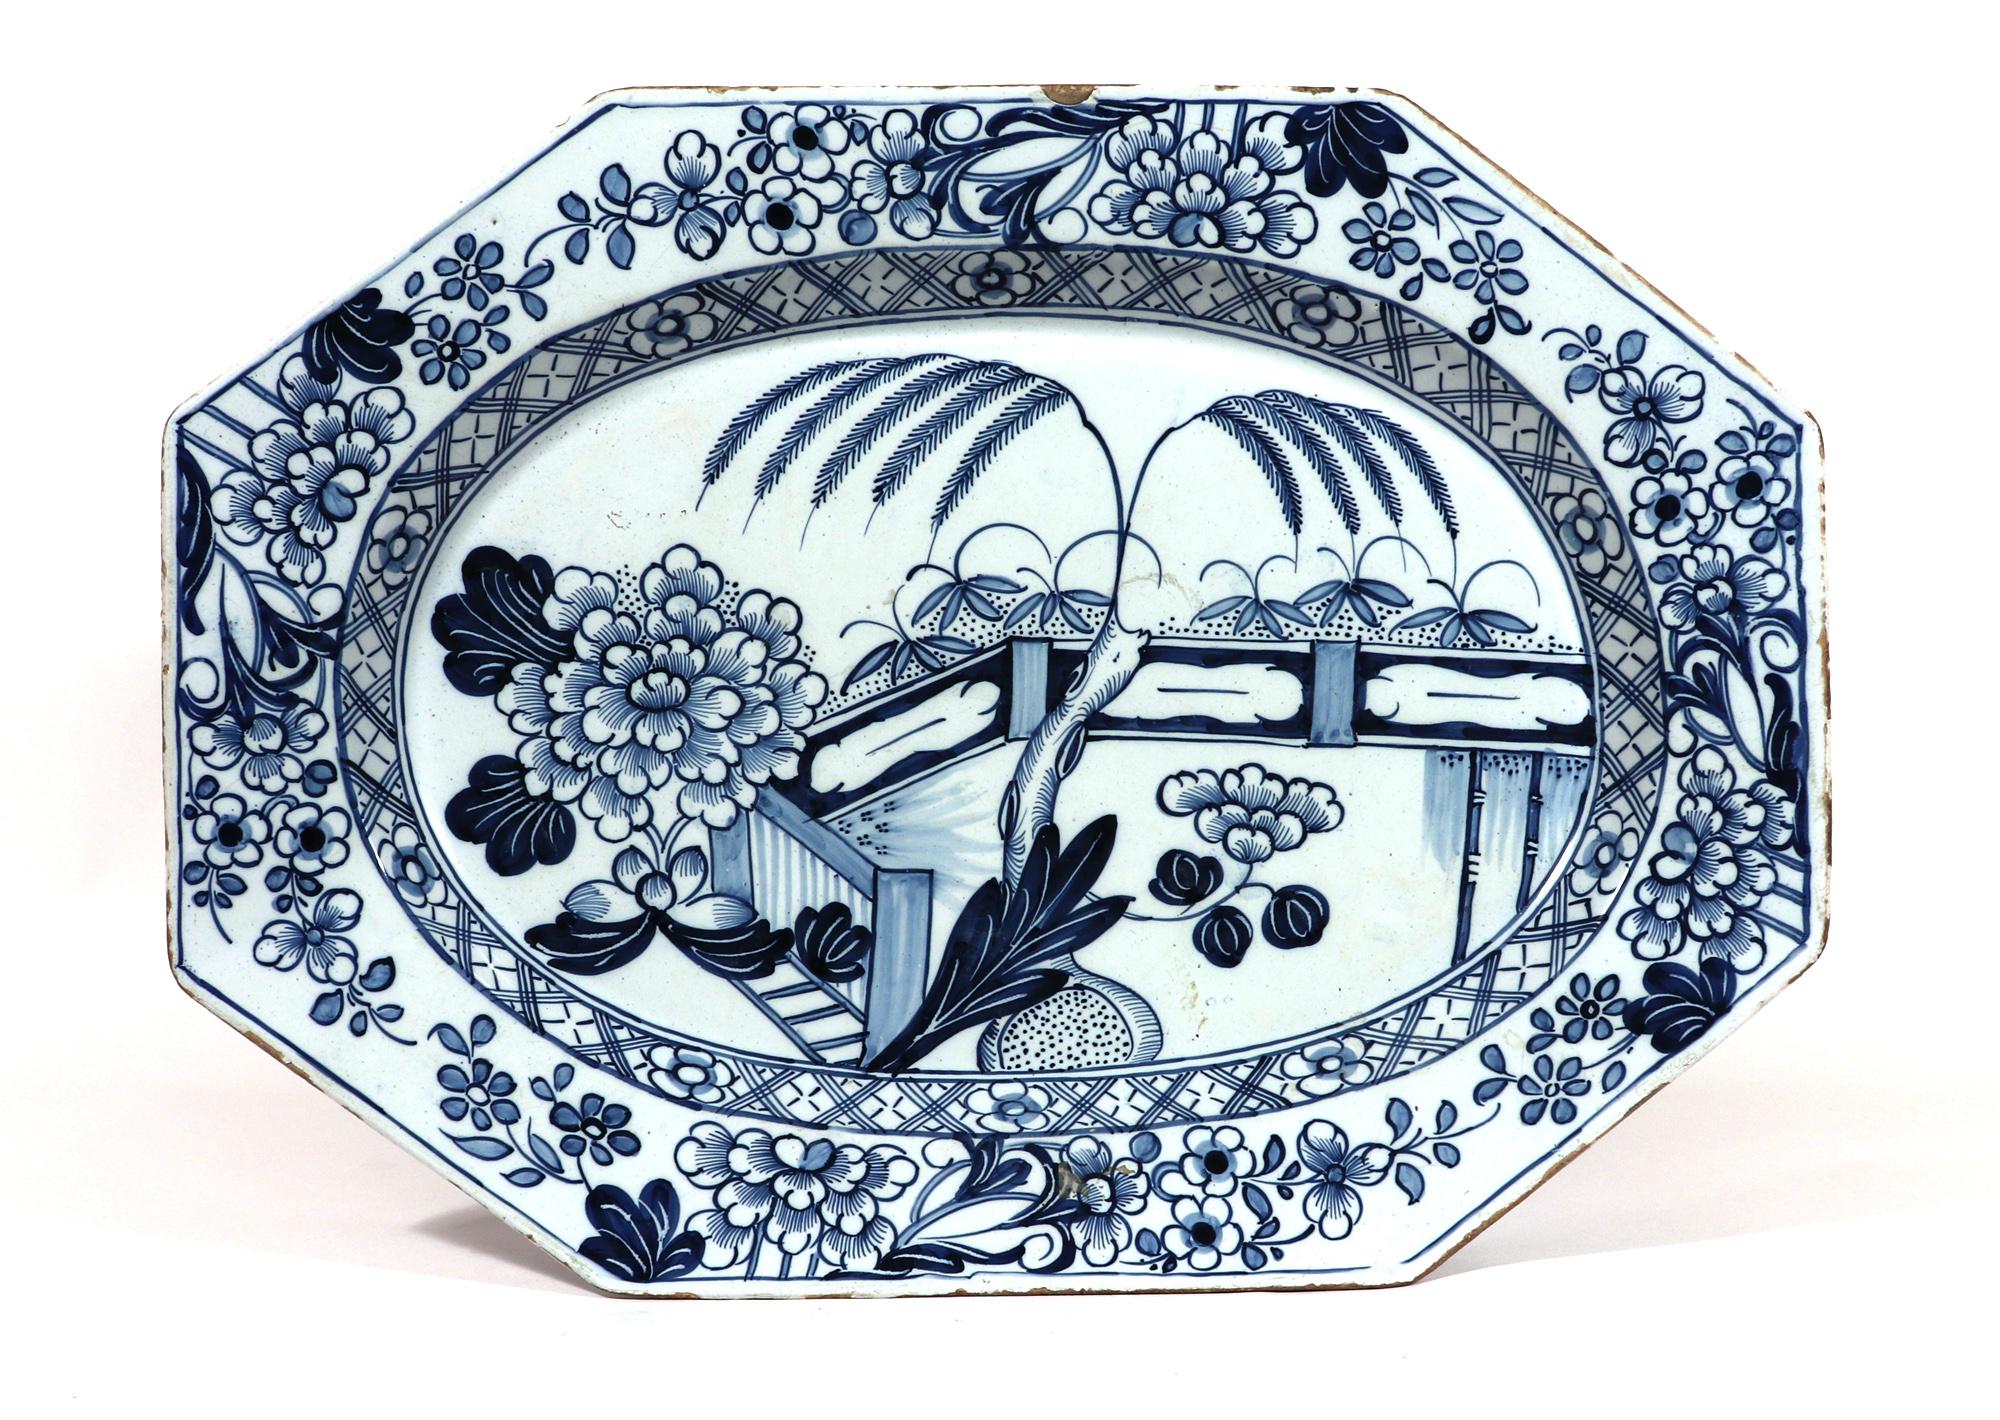 Delftware Blue & White Chinoiserie dish,
Irish (Dublin) or Liverpool,
1745-65

The rectangular British Delftware underglaze Blue Dish with canted corners and of large size is painted with a Chinoiserie garden scenes. The central well with a